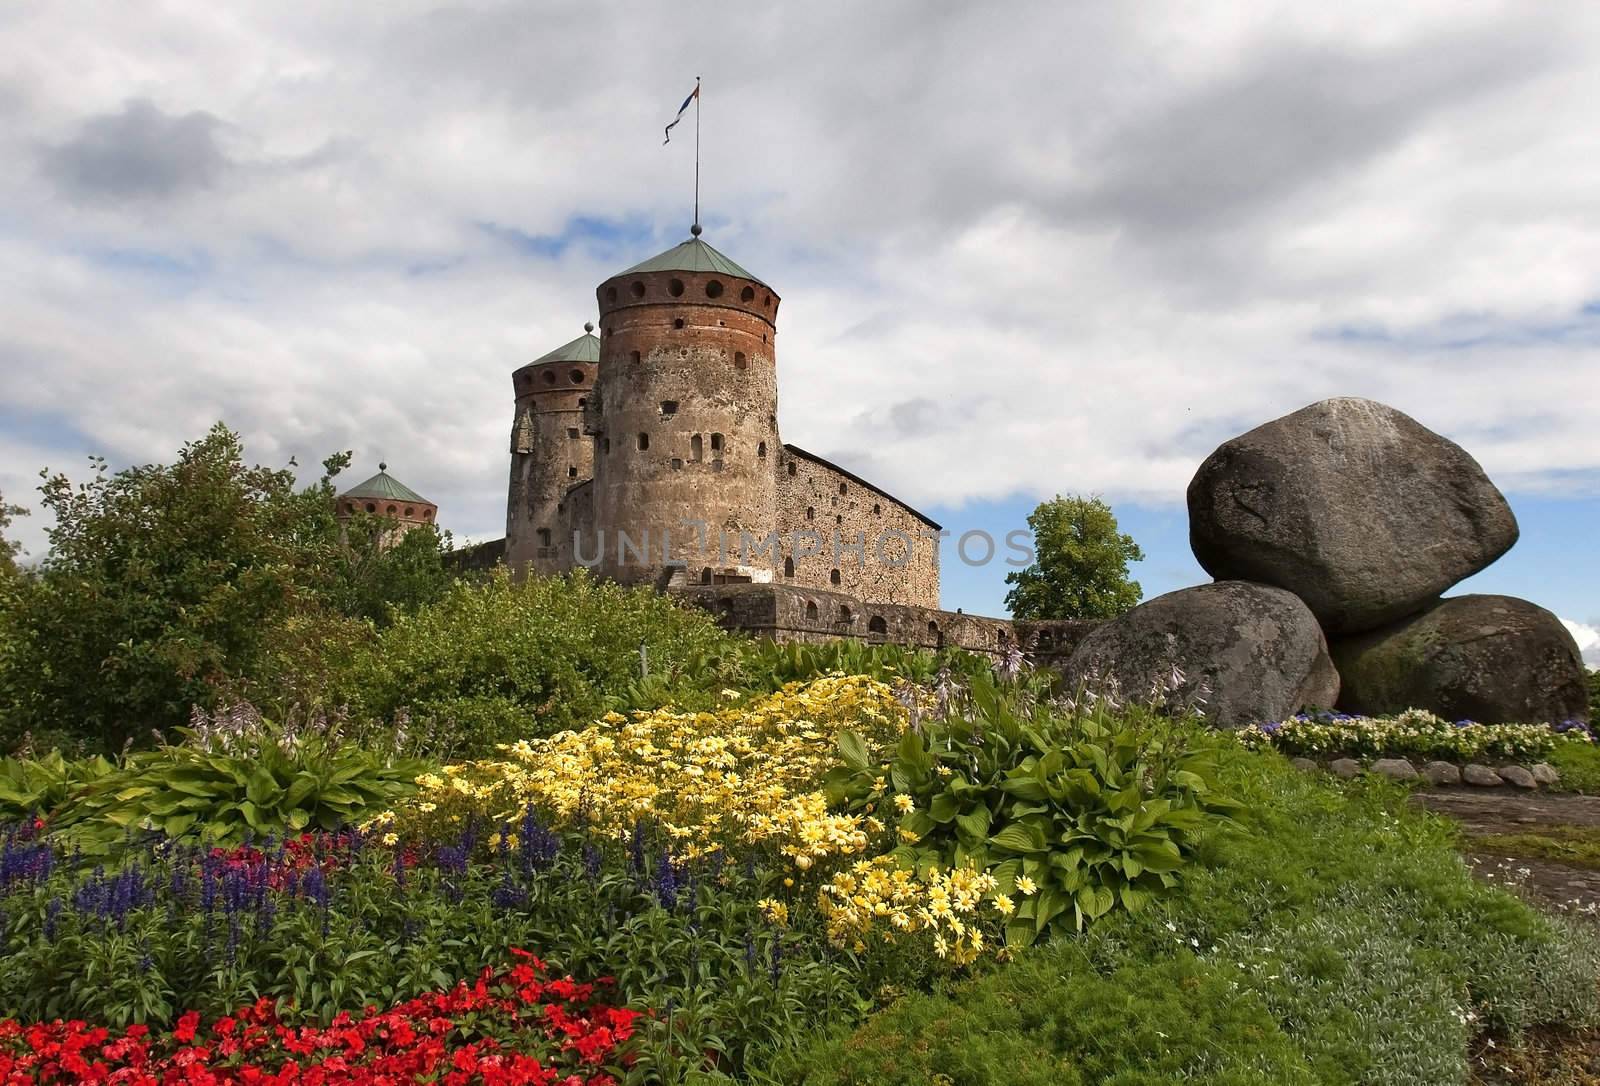 the fortress town of Savonlinna by irisphoto4